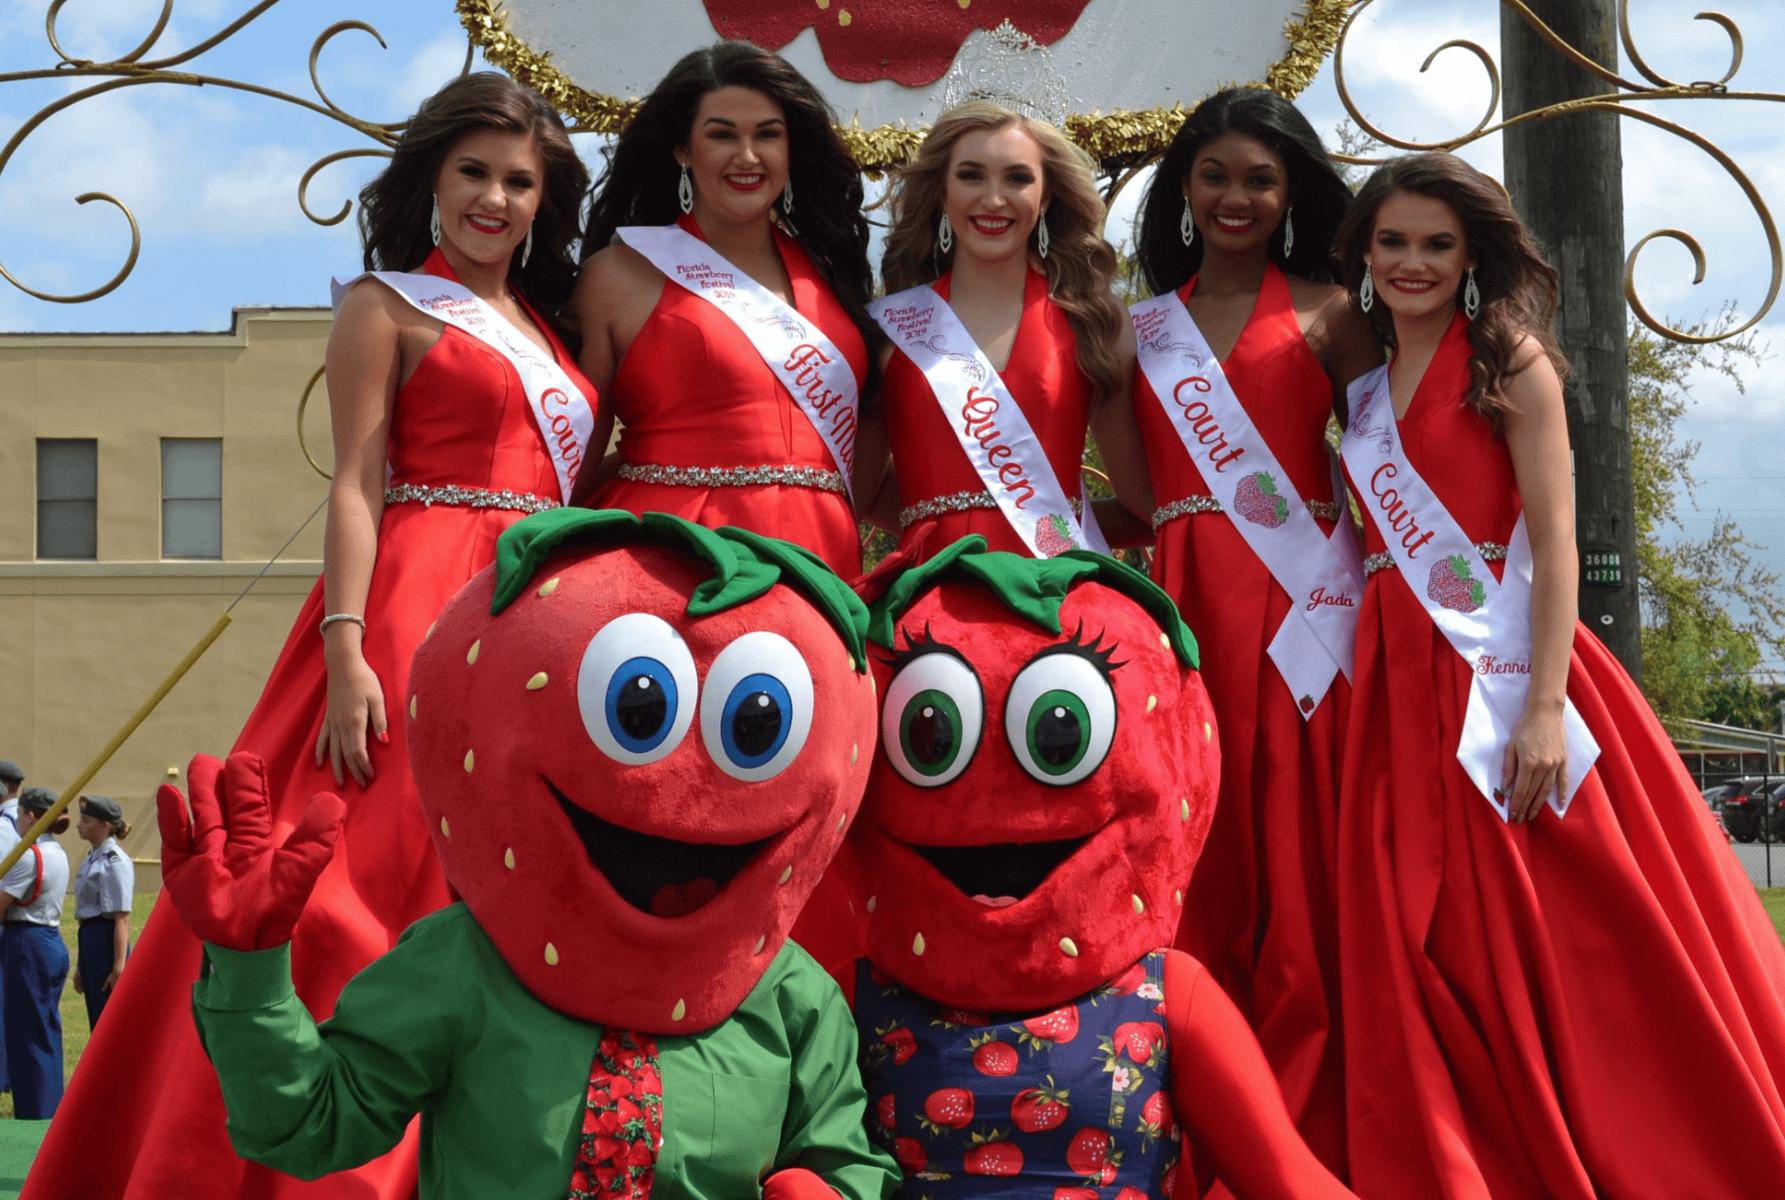 Florida Strawberry Festival Queen's Pageant - Orlando on the Cheap